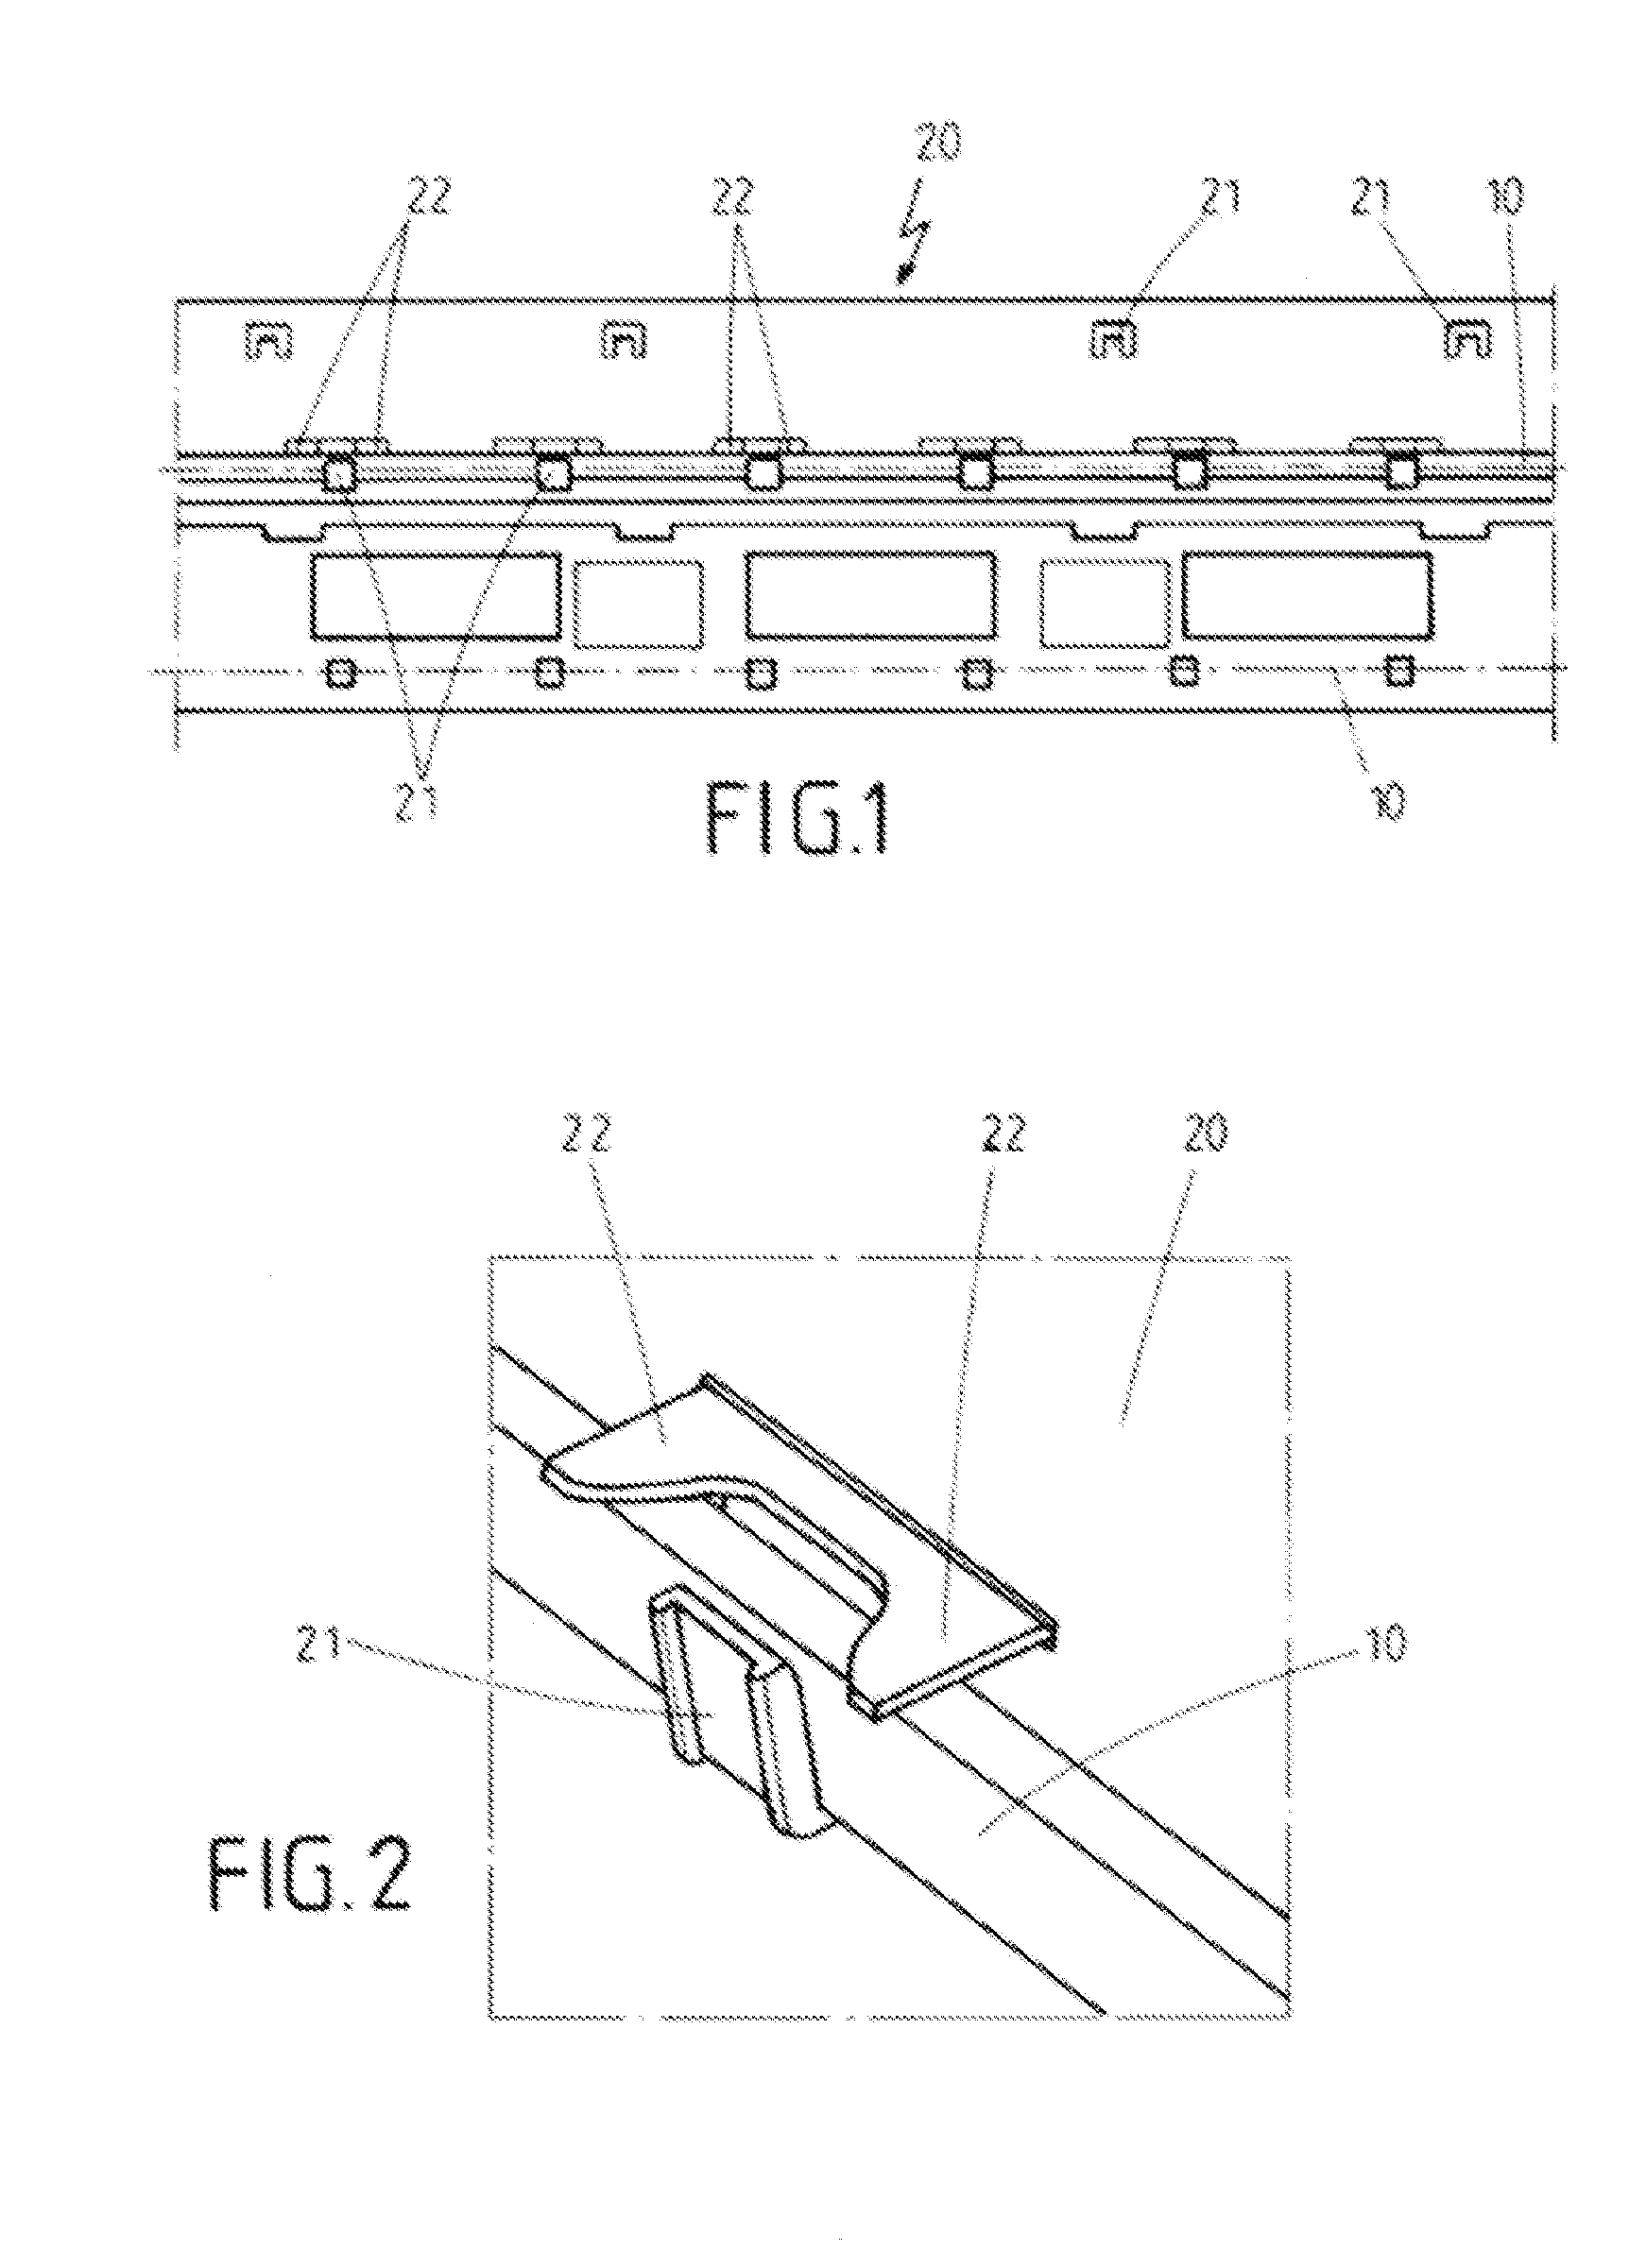 Device for arrangement of sensors for electronic activation of a vehicle hatch